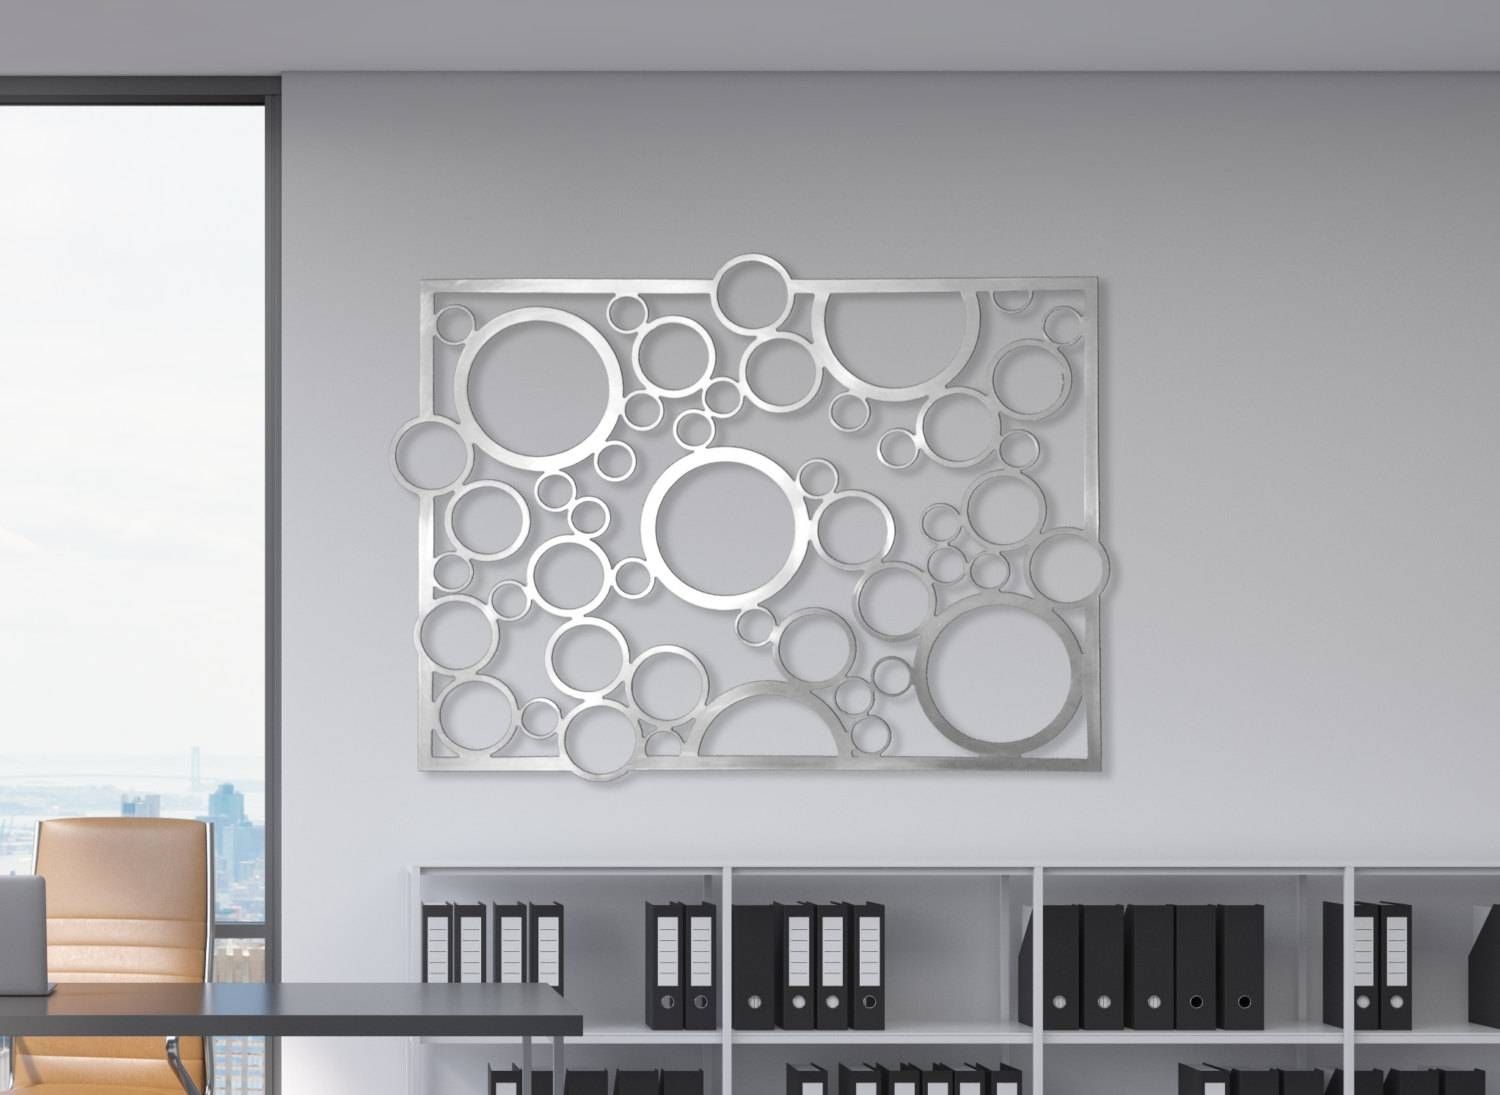 Laser Cut Metal Decorative Wall Art Panel Sculpture For Home With Regard To 2018 Laser Cut Metal Wall Art (View 5 of 20)